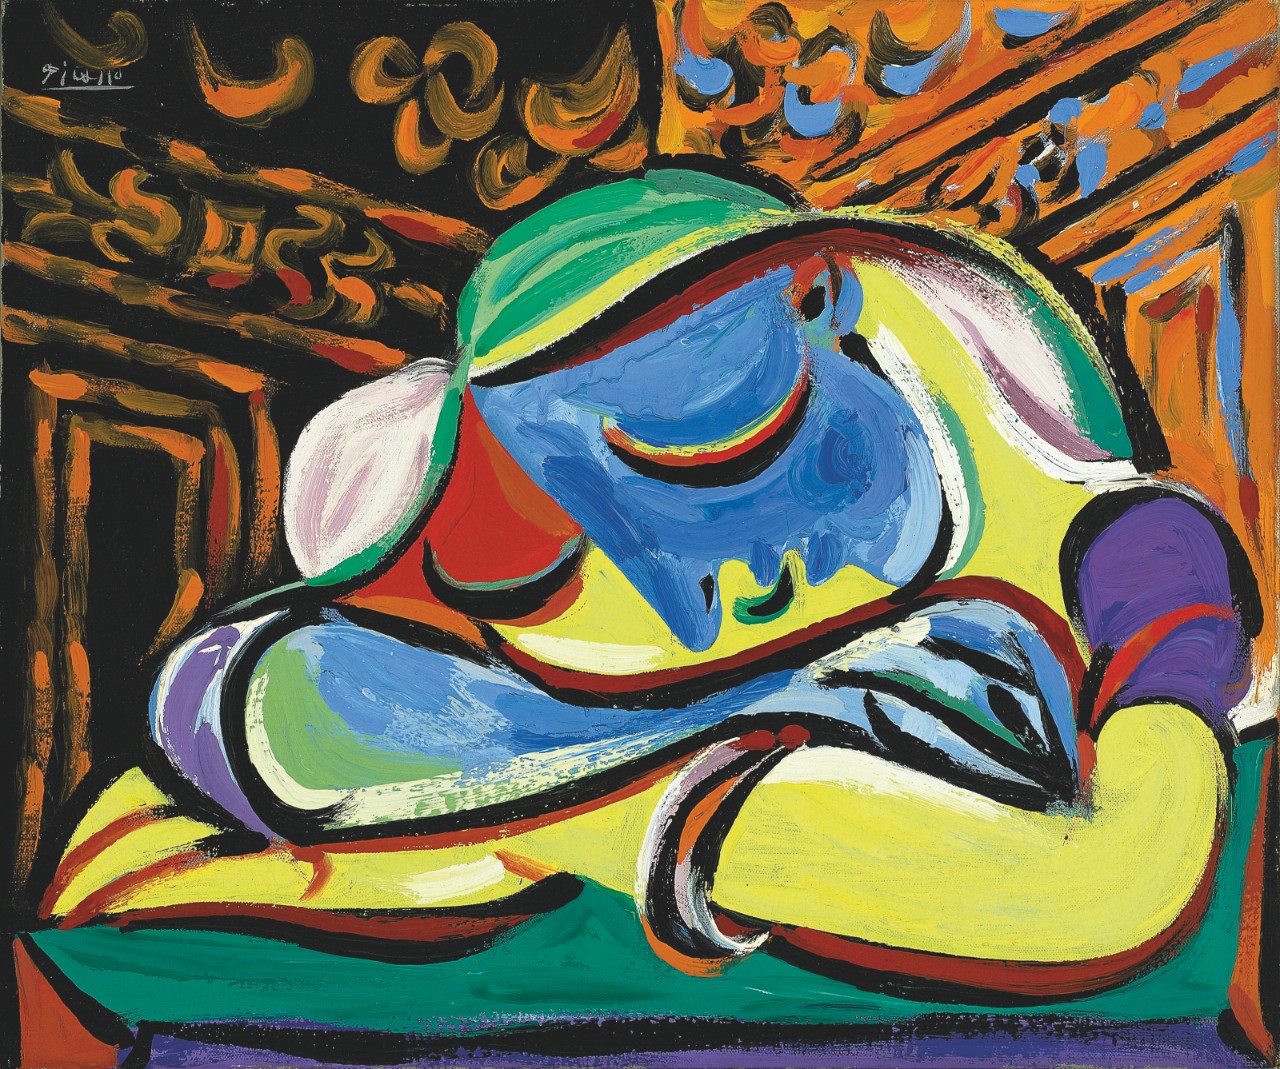 A colourful painting of a woman resting her head on her arms, eyes closed.